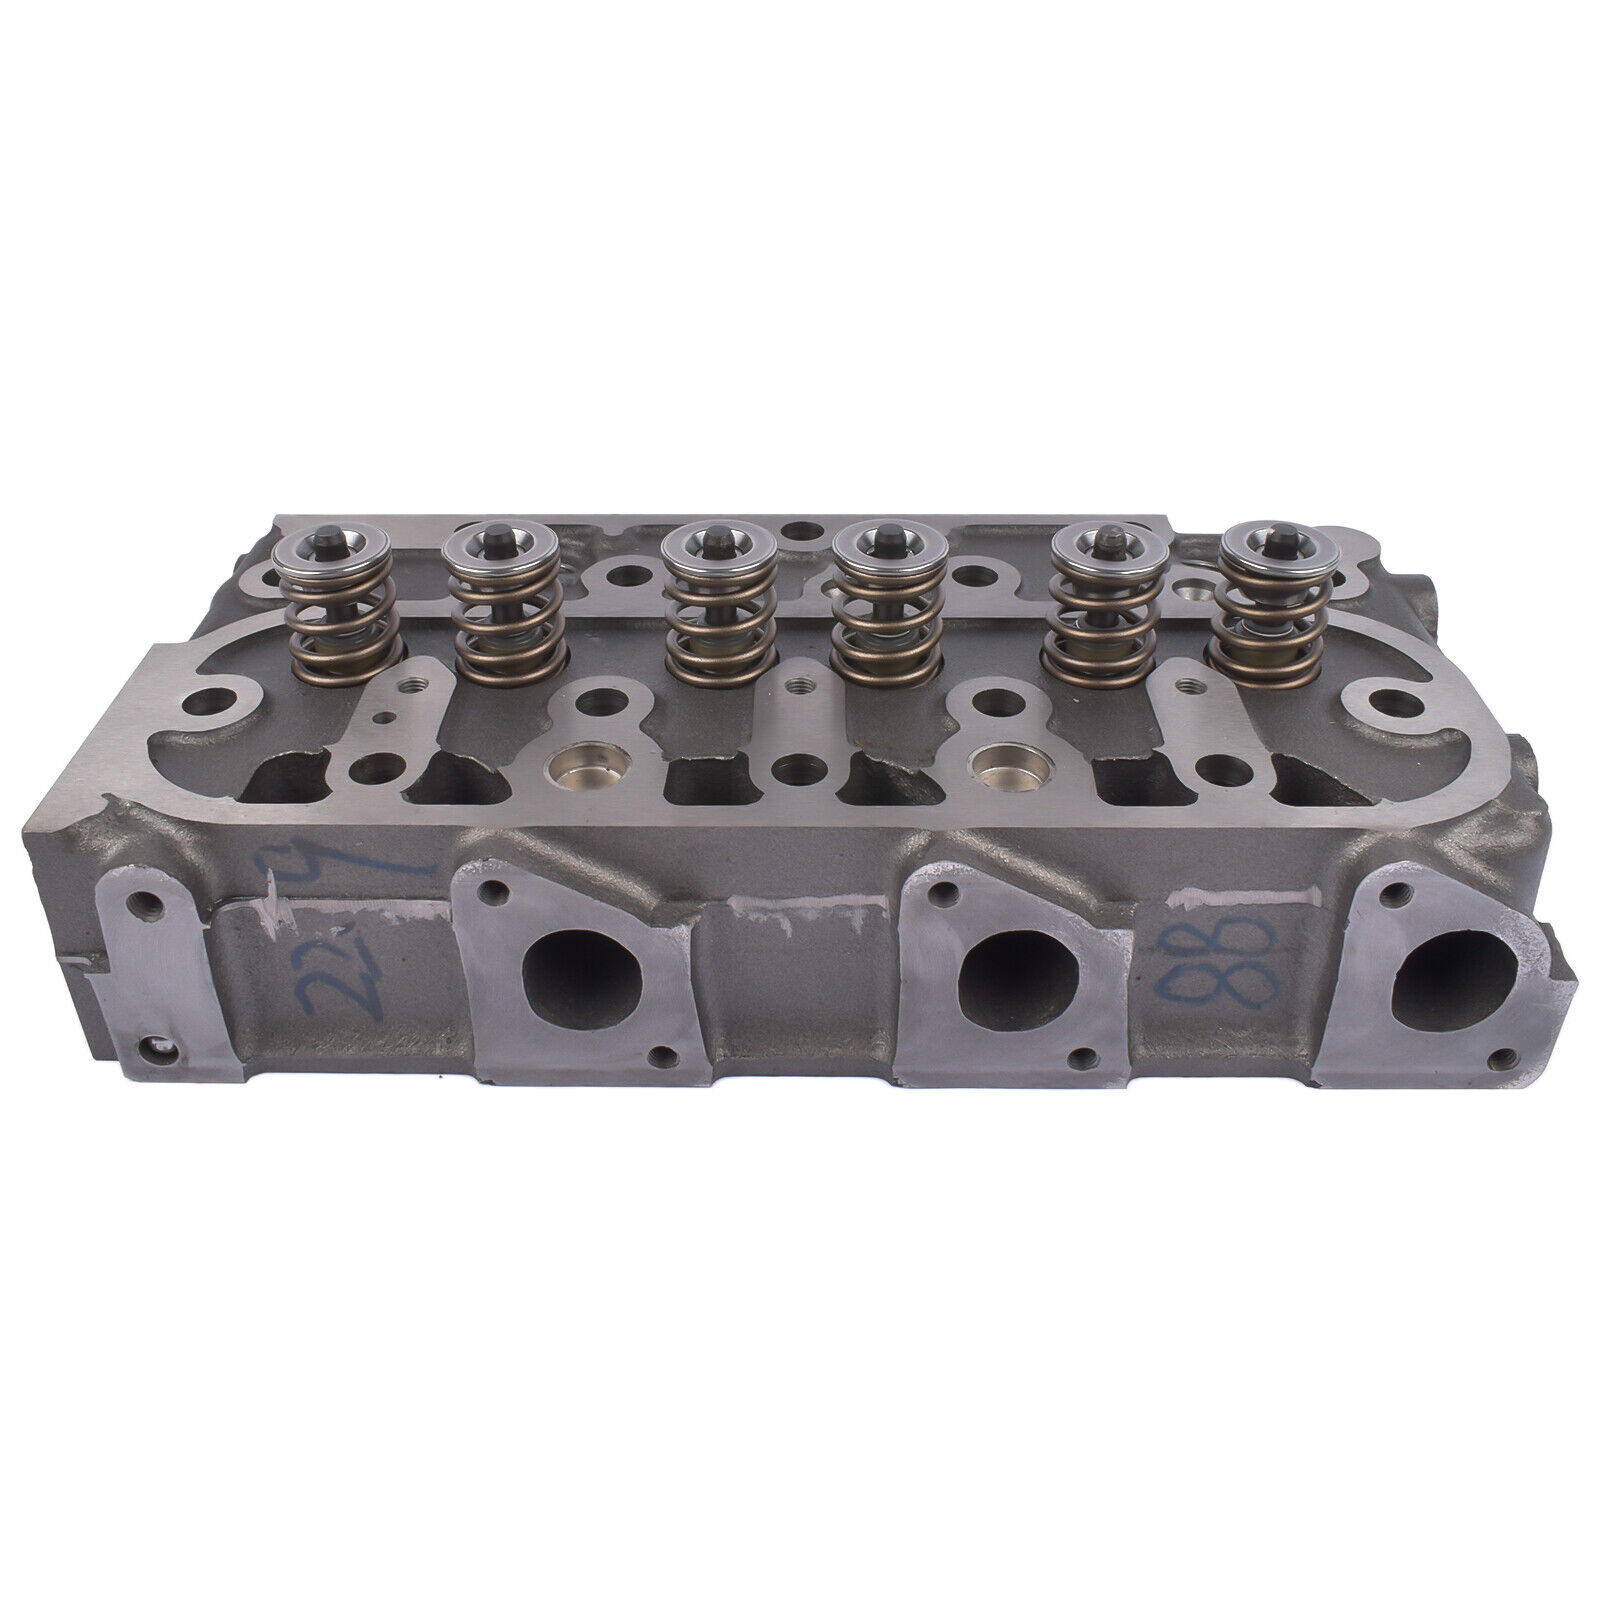 New Complete Cylinder Head with Valves for Kubota D1105 RTV1100 RTV1140CPX